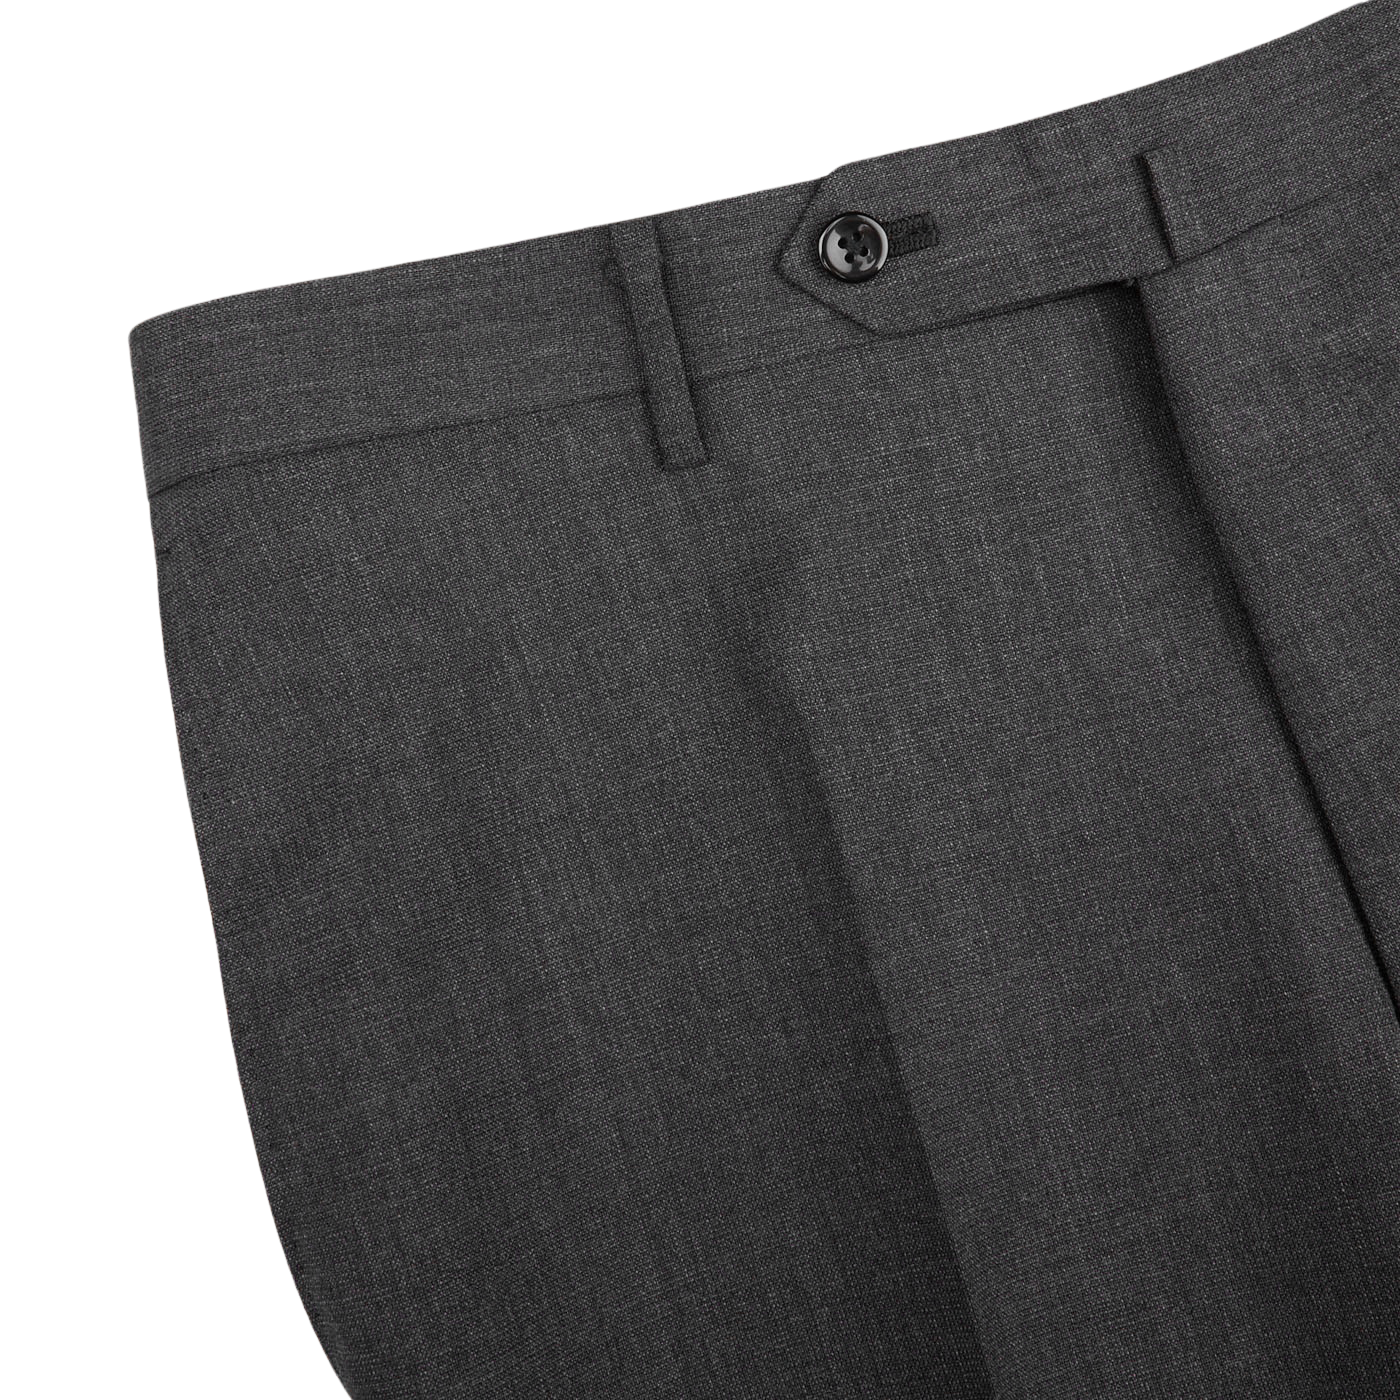 A close up of Ring Jacket's Grey High Twist Wool Suit pants made from wool fresco fabric.